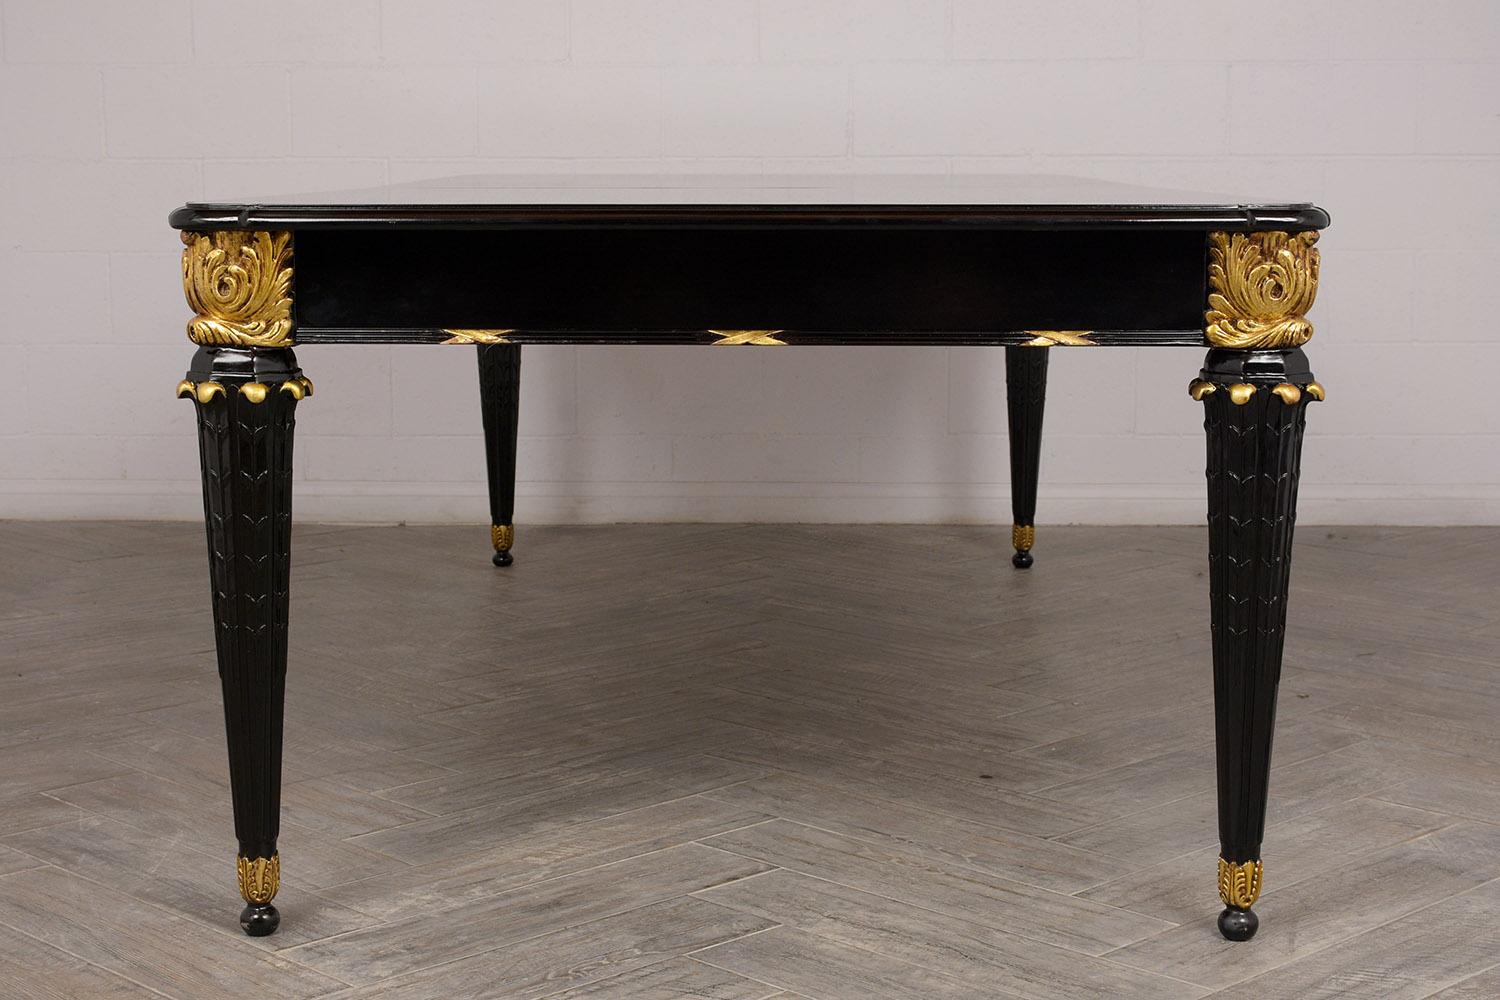 Grand 1950s Ebonized Extendable Dining Room Table in Regency Style 5